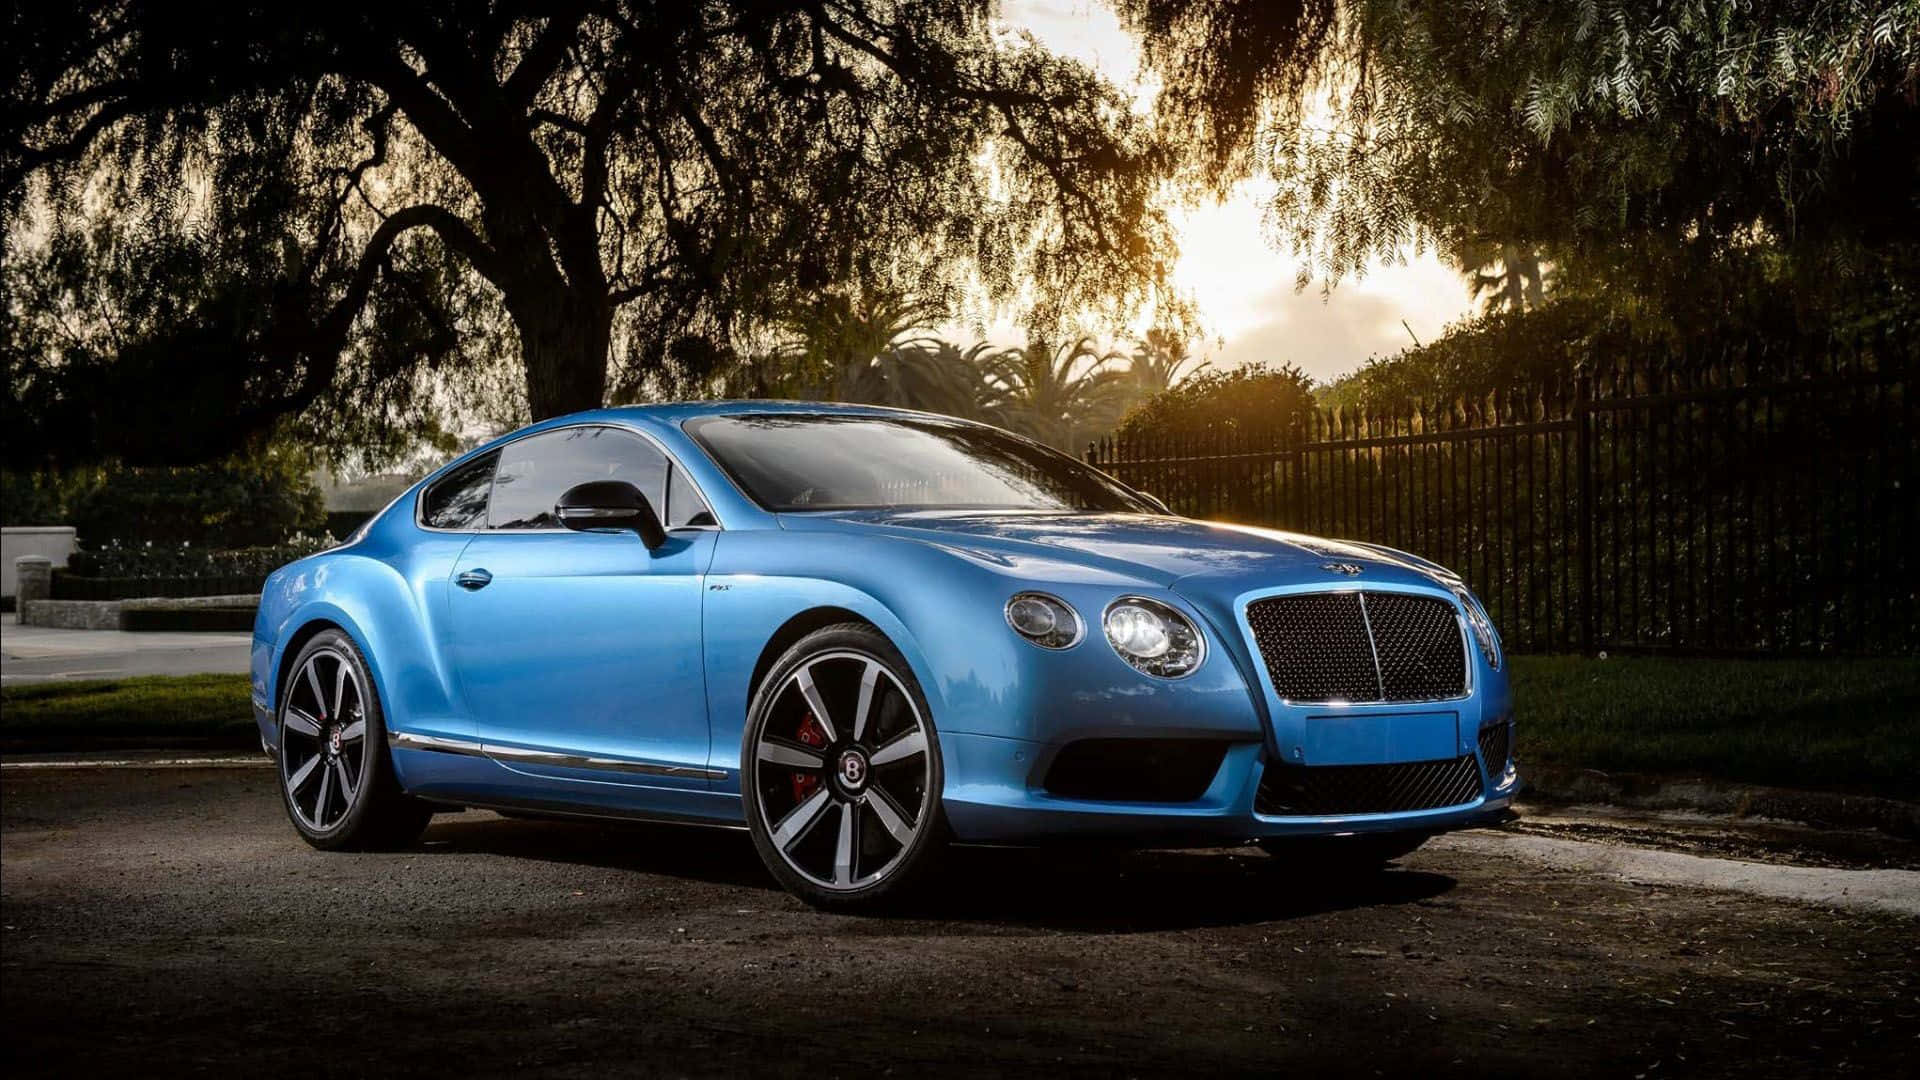 Experience the Luxury of Driving a Bentley